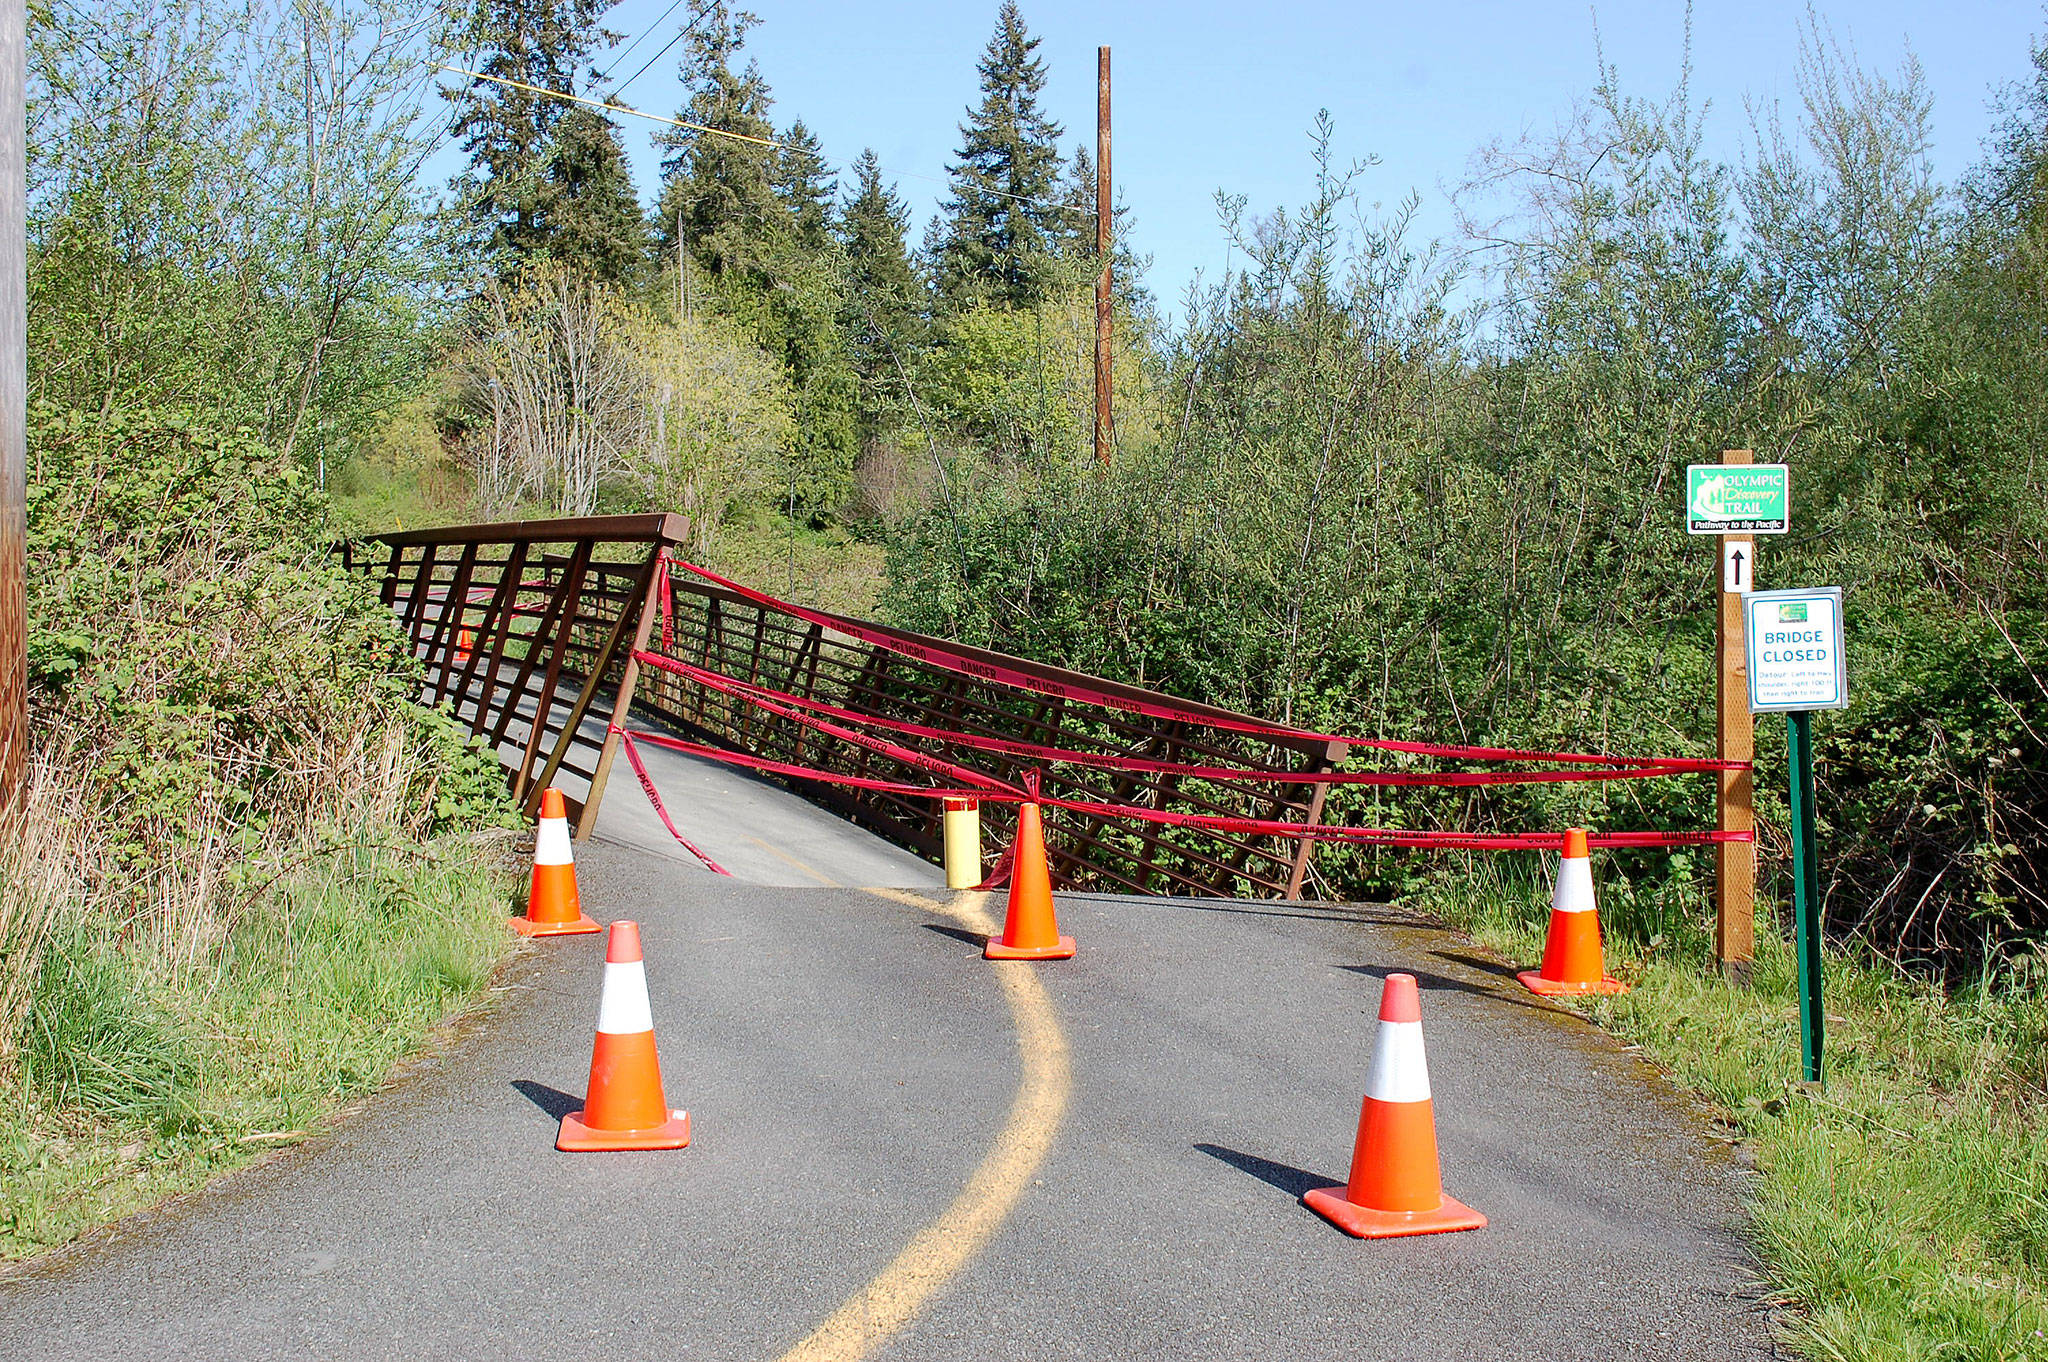 In mid-April, a portion of the Dean Creek bridge in Blyn sunk due to high water leading officials with the Jamestown S’Klallam Tribe and the Peninsula Trails Coalition to close it. No timetable has been set for its repair. (Erin Hawkins/Olympic Peninsula News Group)